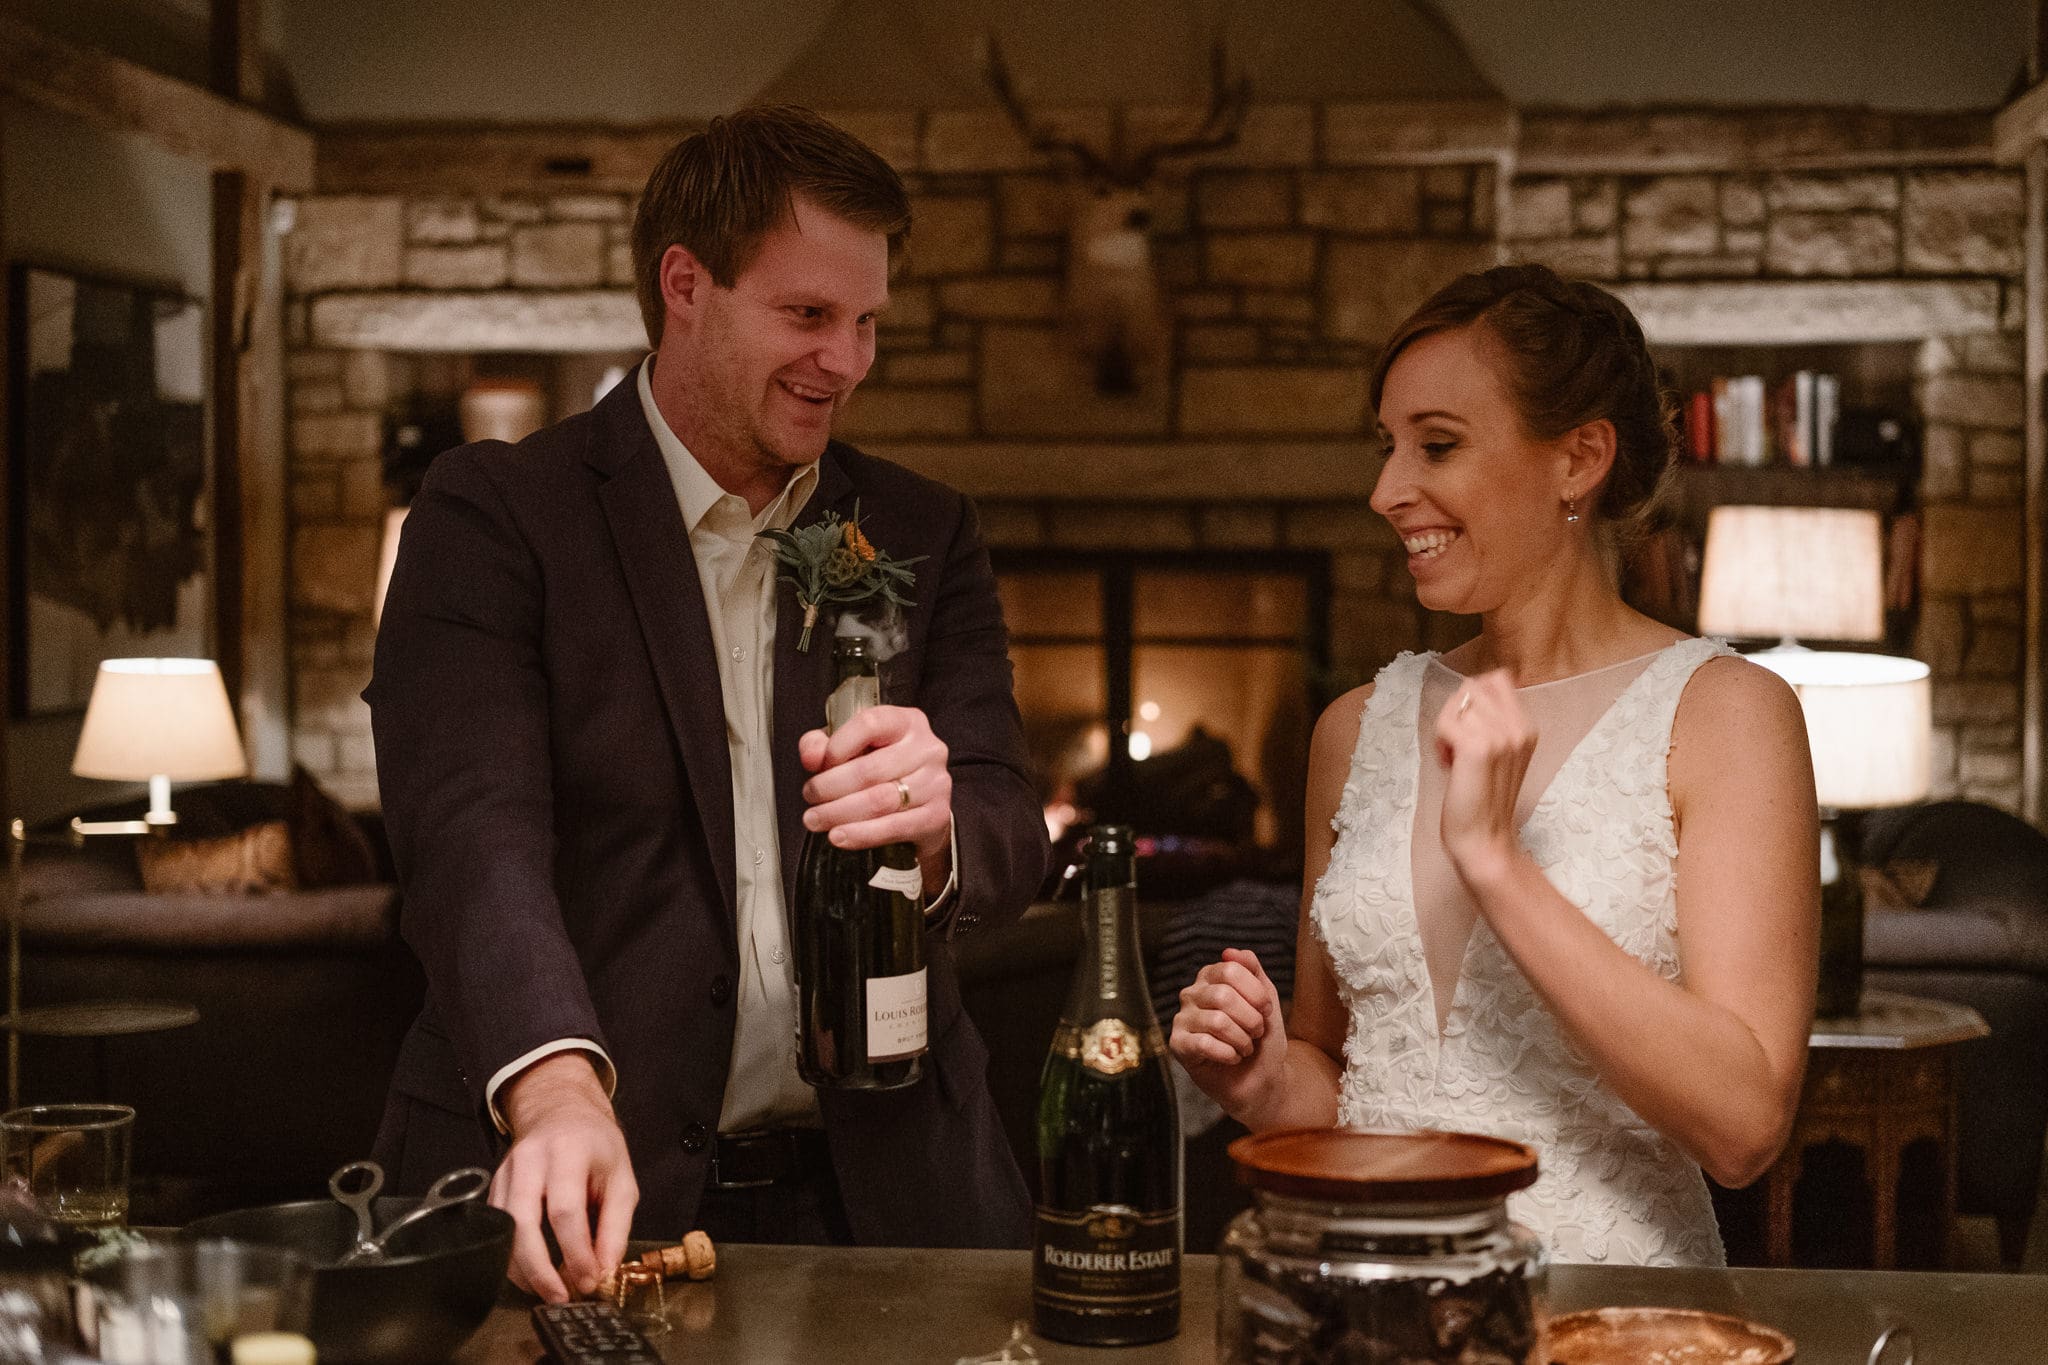 Crested Butte Wedding Photographer, Scarp Ridge Lodge intimate elopement, bride and groom popping champagne, luxury mountain lodge in Colorado